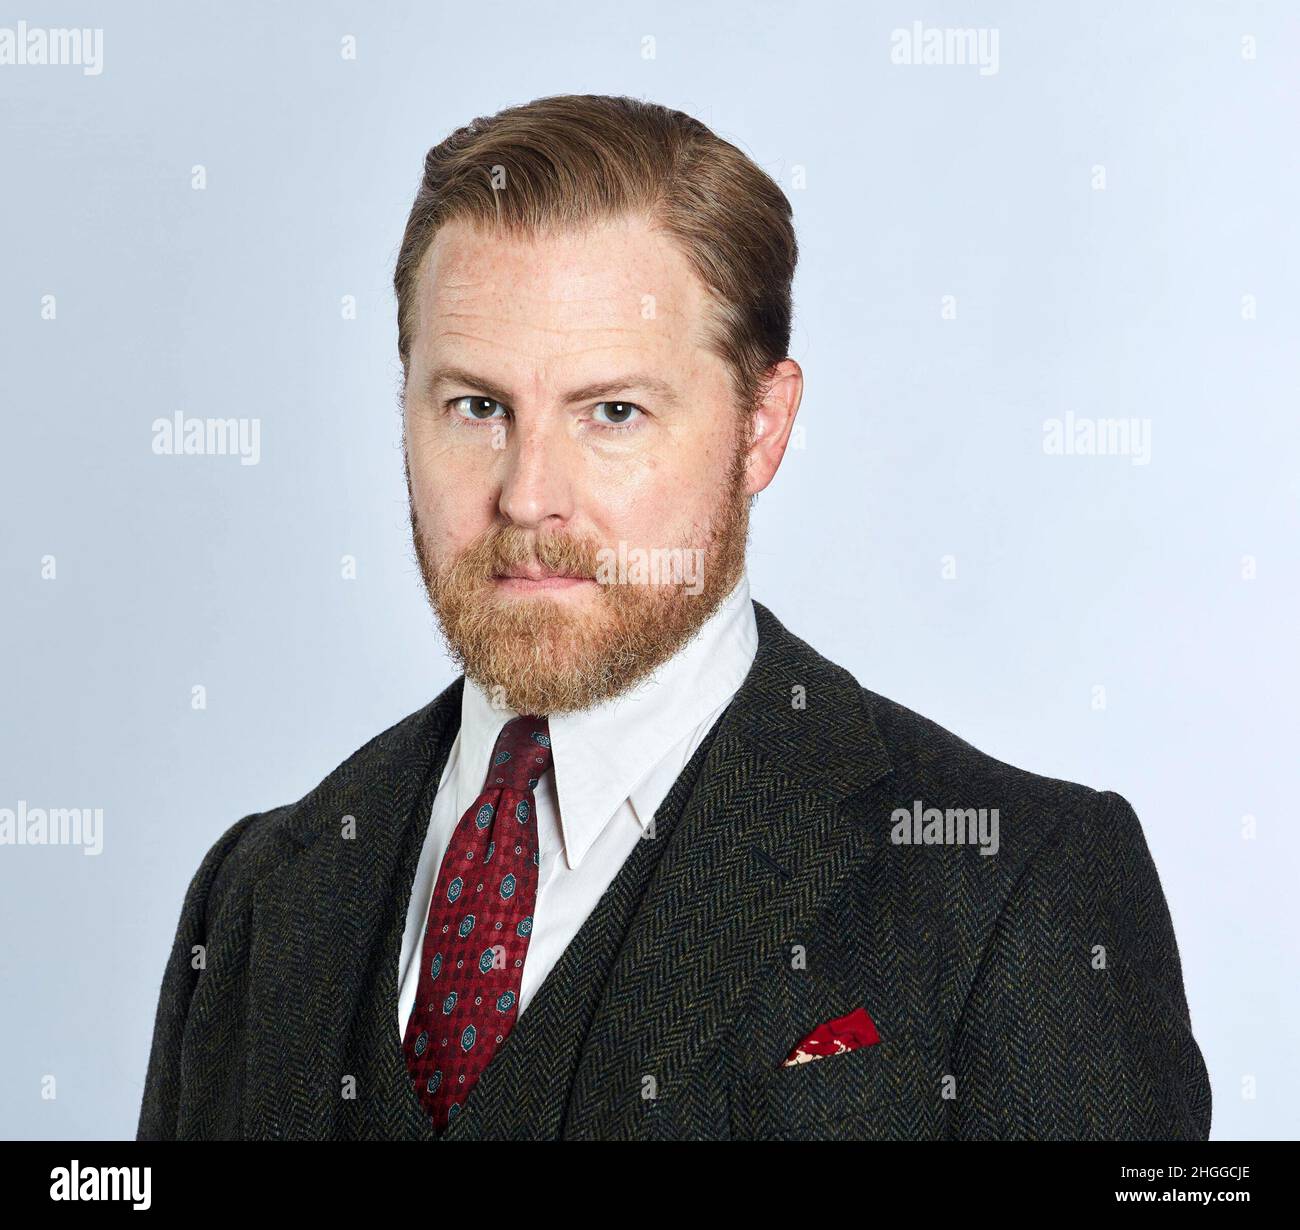 SAMUEL WEST in ALL CREATURES GREAT AND SMALL (2020), directed by BRIAN PERCIVAL and ANDY HAY. Credit: Playground Entertainment / Album Stock Photo